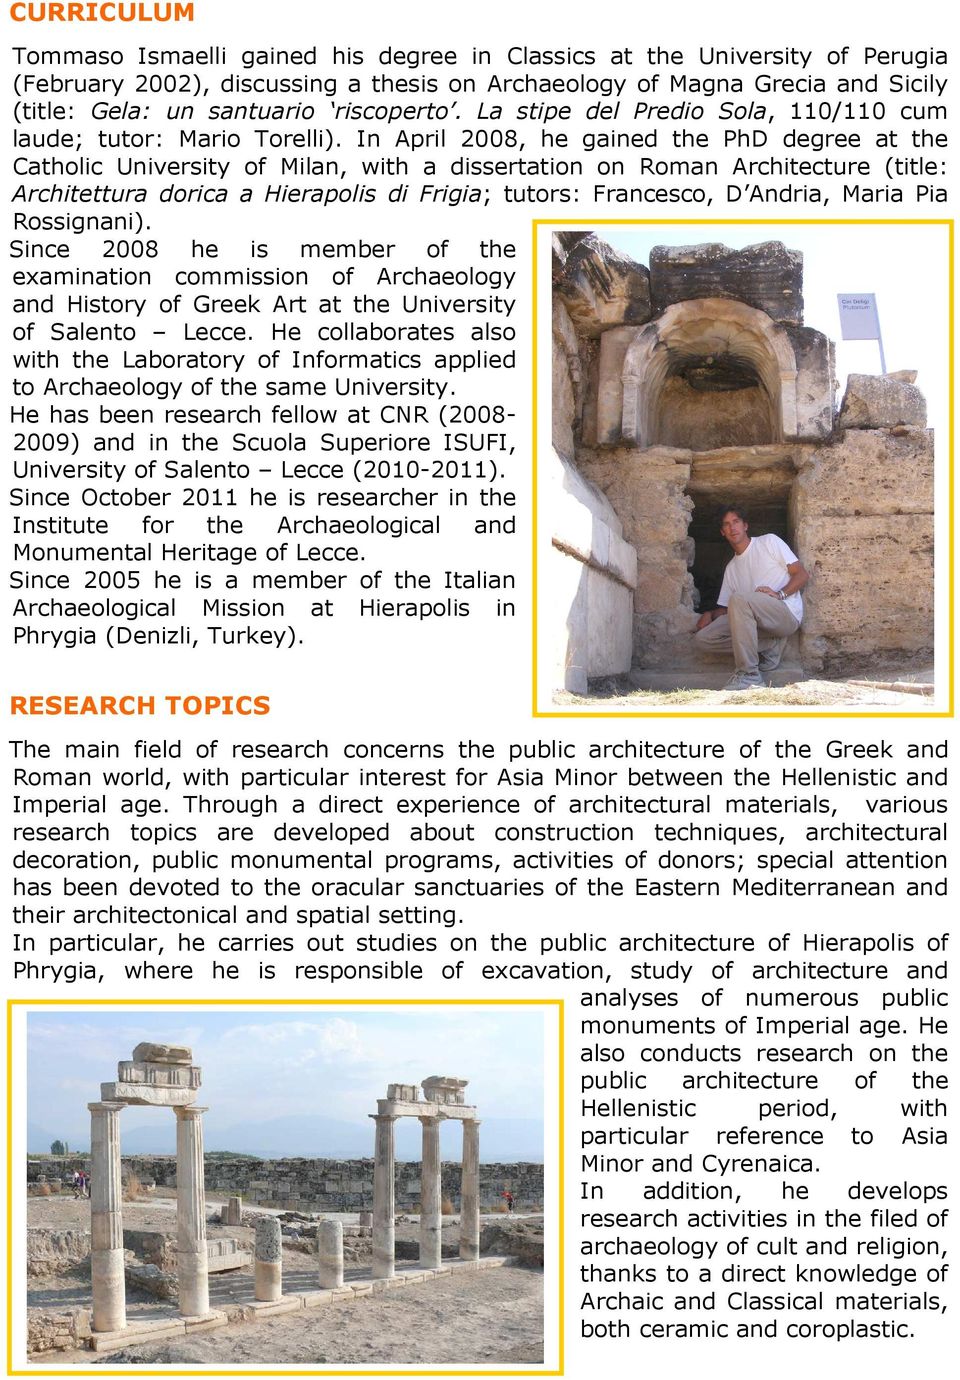 In April 2008, he gained the PhD degree at the Catholic University of Milan, with a dissertation on Roman Architecture (title: Architettura dorica a Hierapolis di Frigia; tutors: Francesco, D Andria,